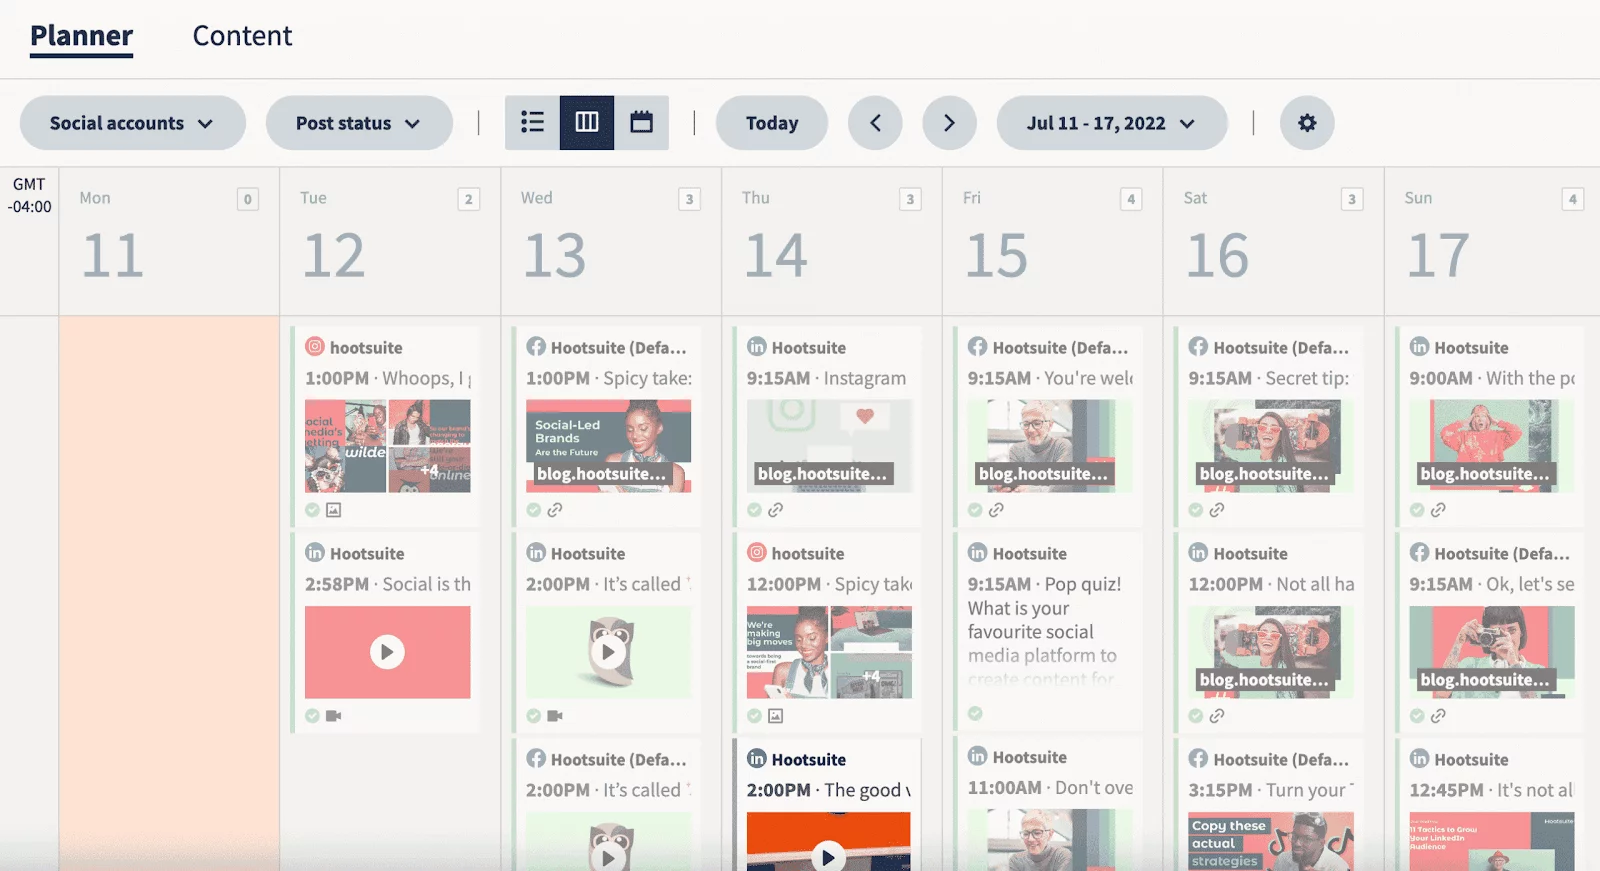 Metricool competitor, Hootsuite's content plan for social media channels